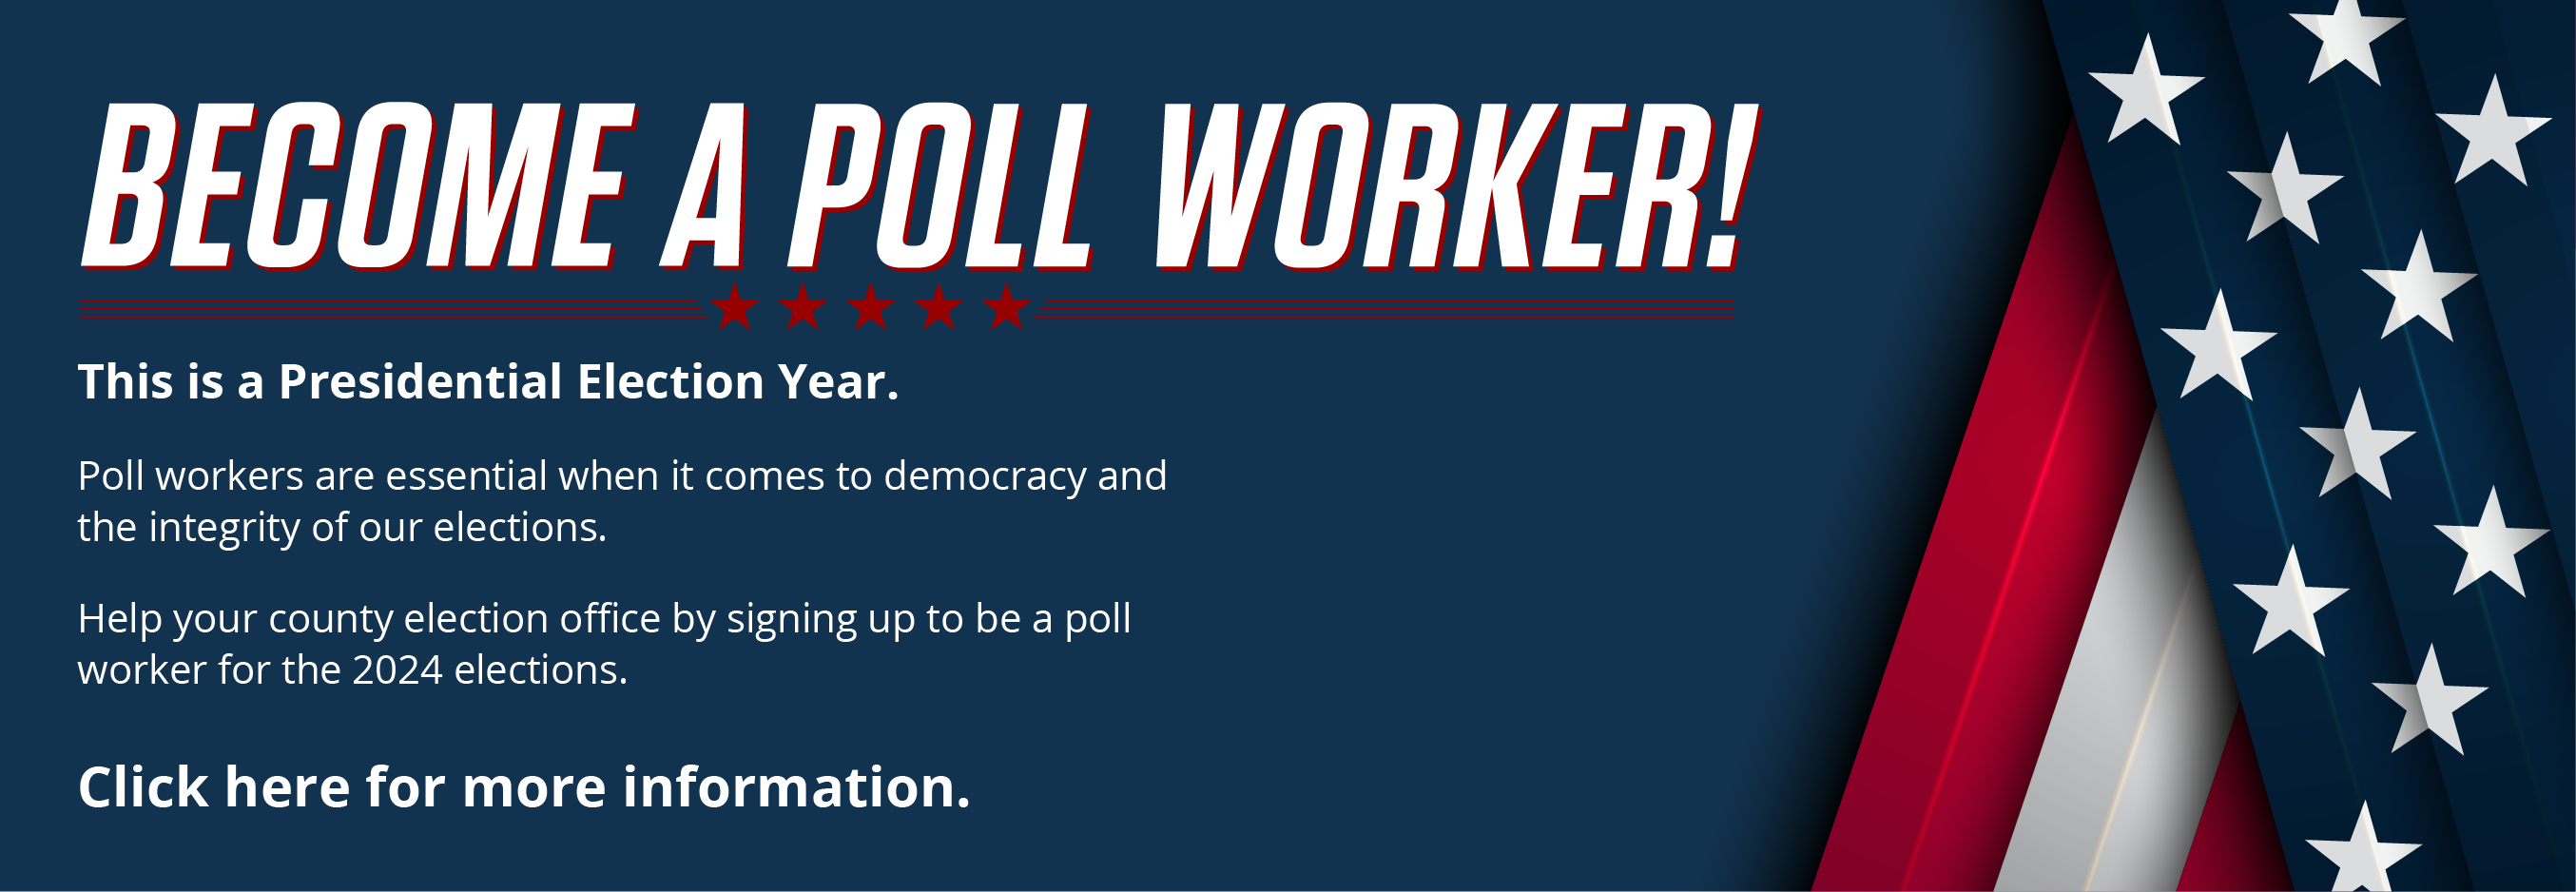 Poll Worker image